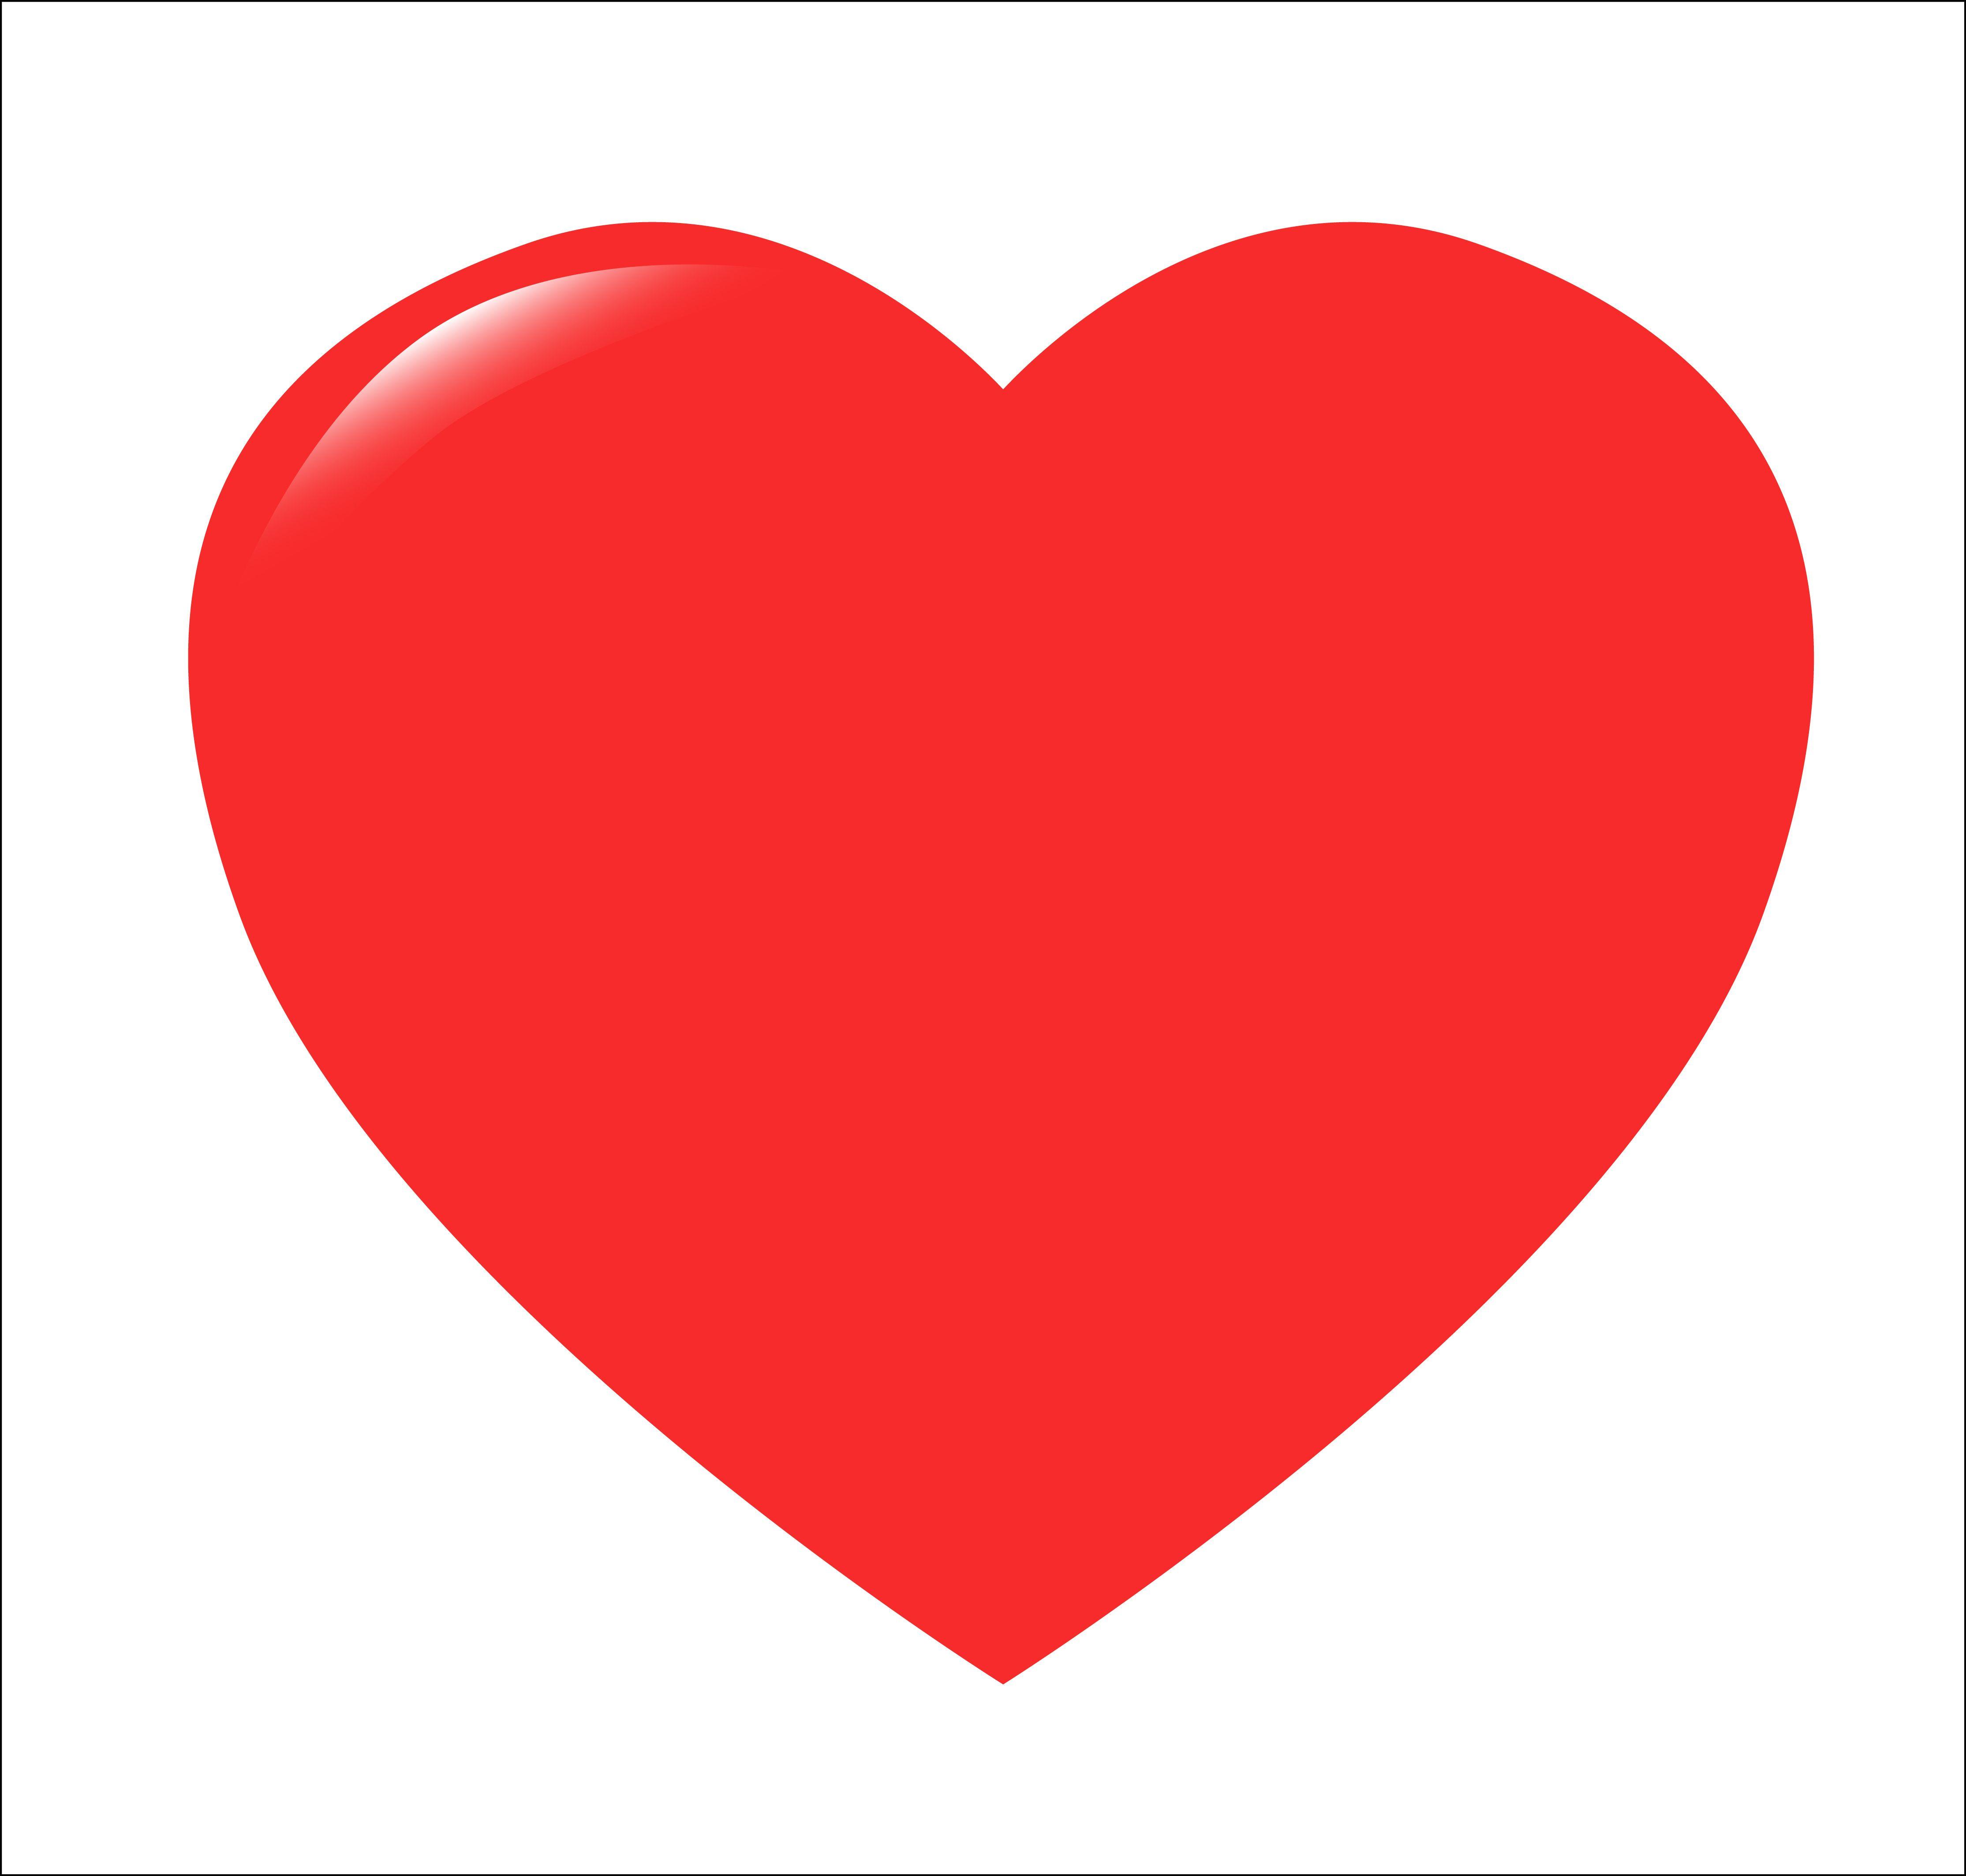 Red Heart Logo - Free Red Heart Picture, Download Free Clip Art, Free Clip Art